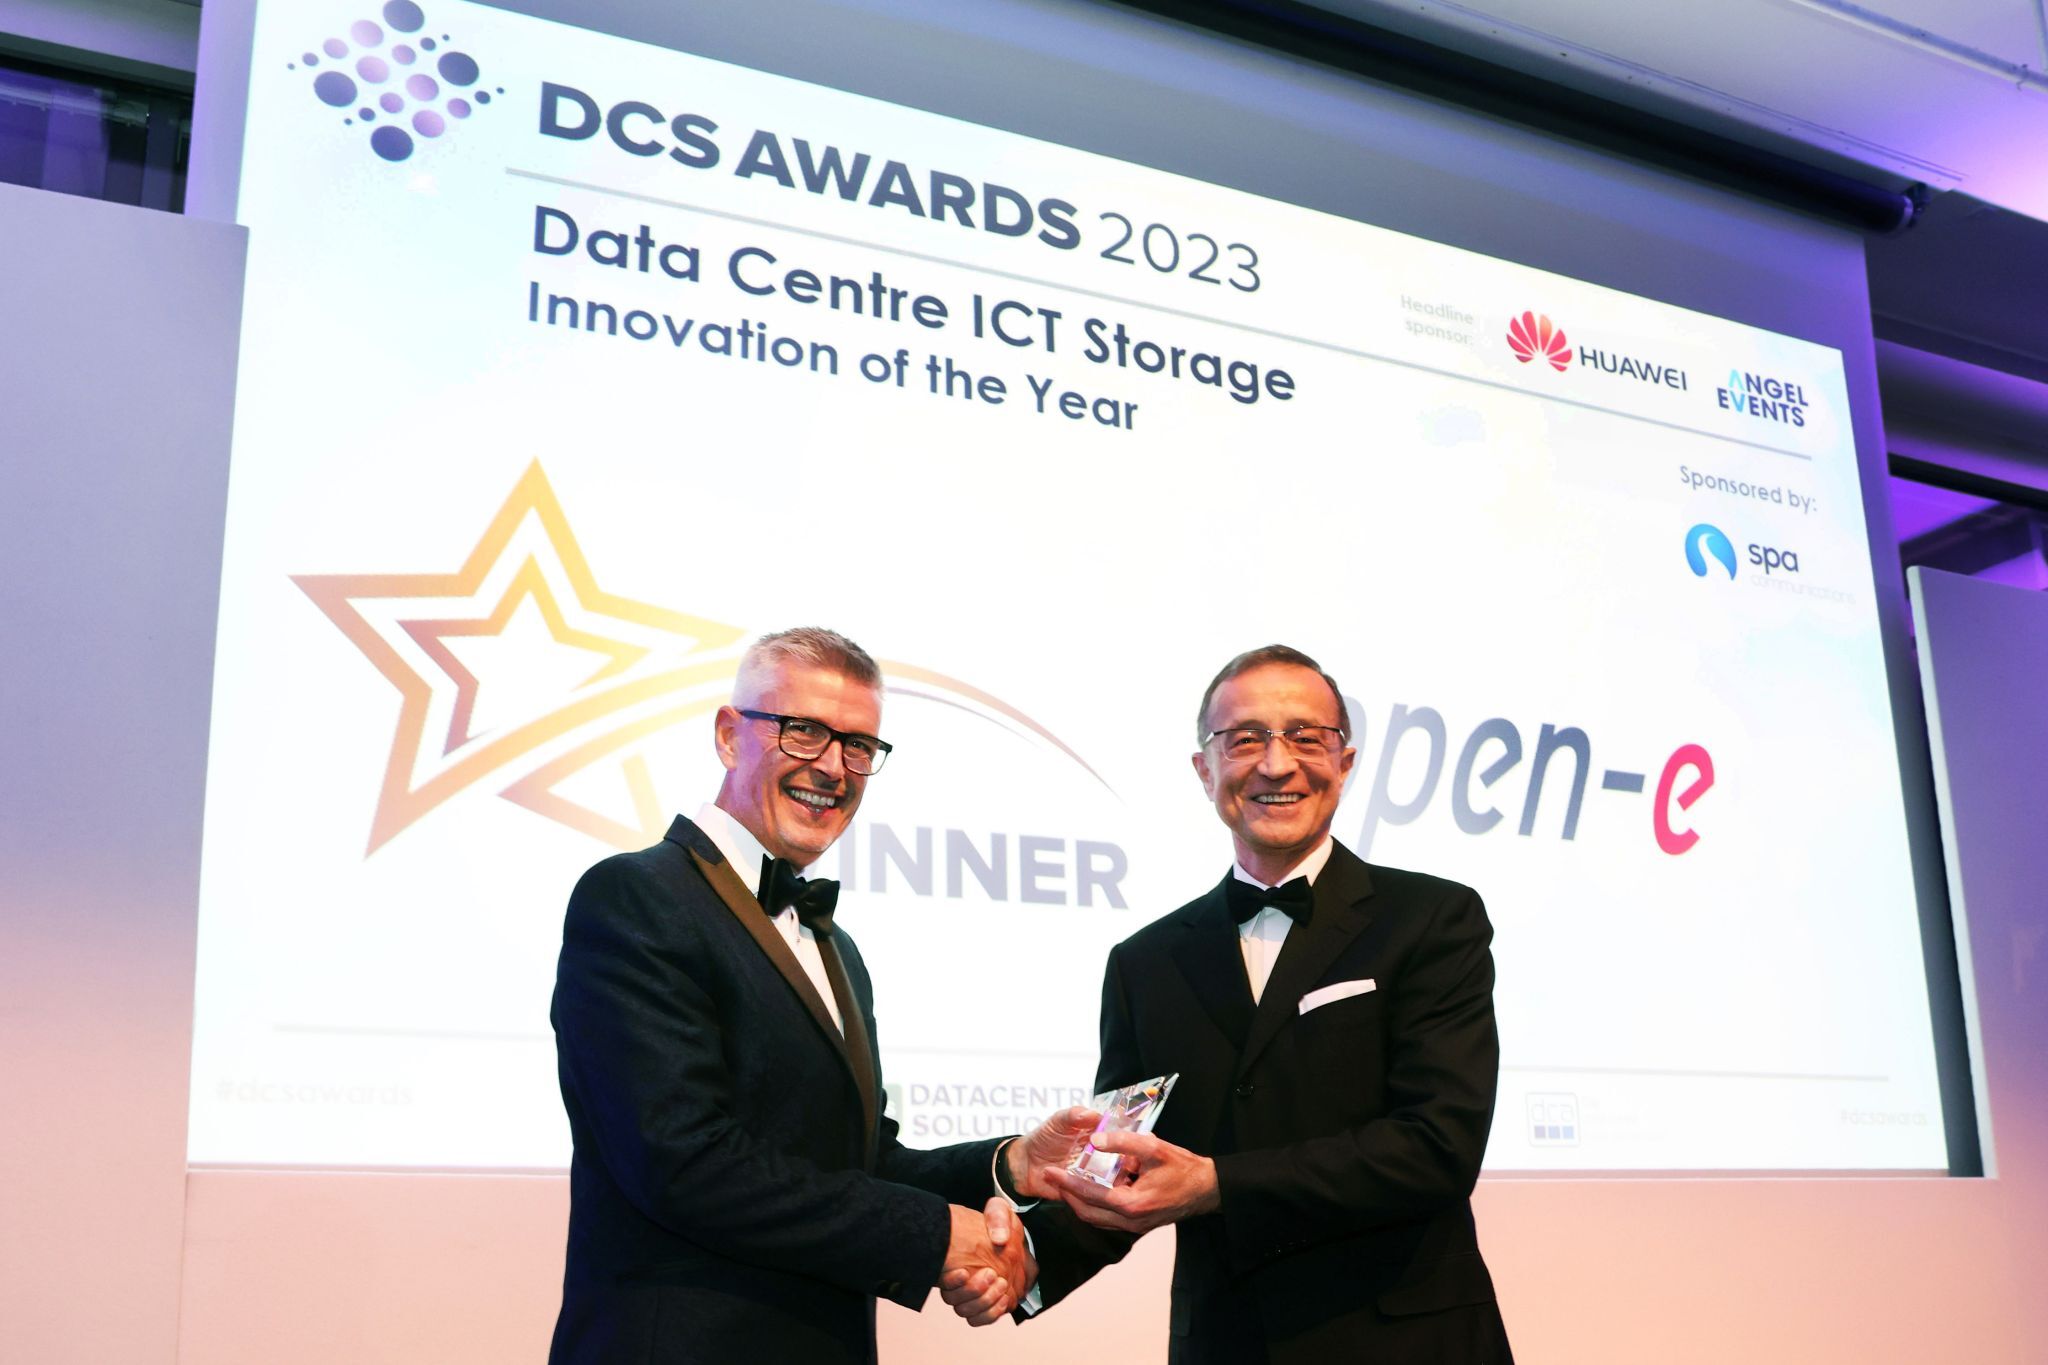 DCS Awards 2023, Open-E Wins the Data Centre ICT Storage Innovation of the Year Award